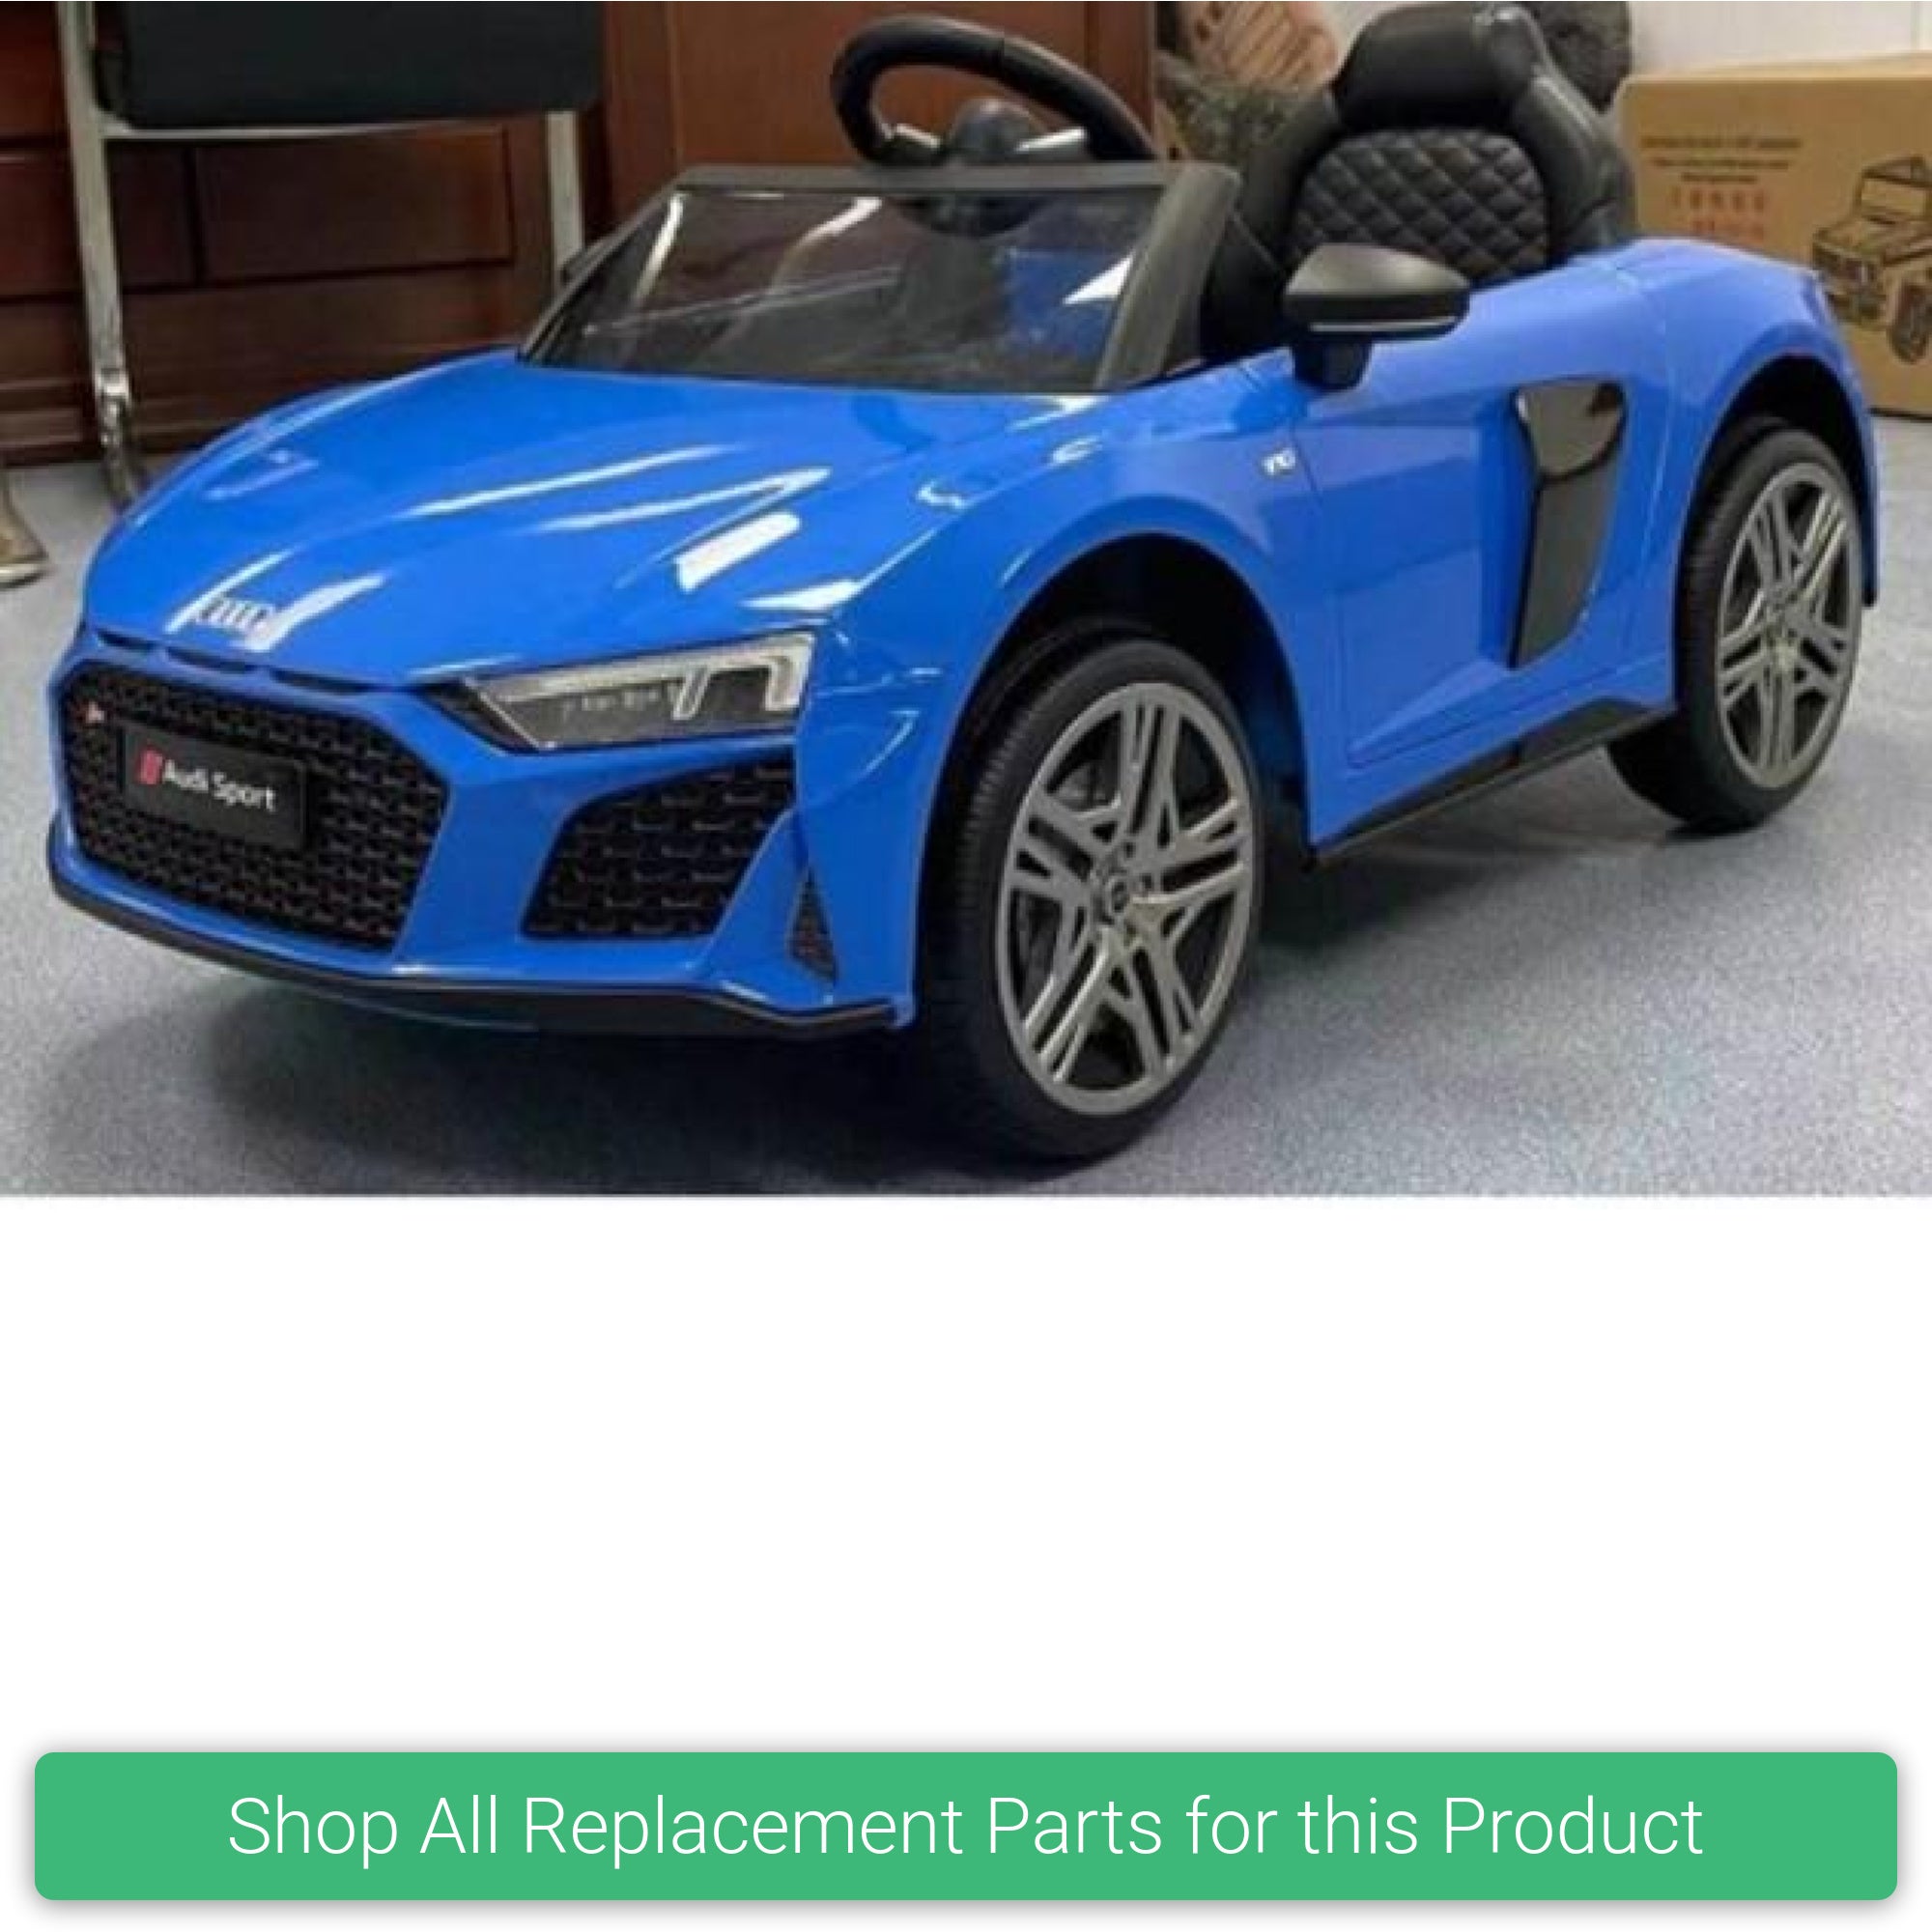 Replacement Parts and Spares for Kids Audi R8 2021 - R8-21-VARI - A300